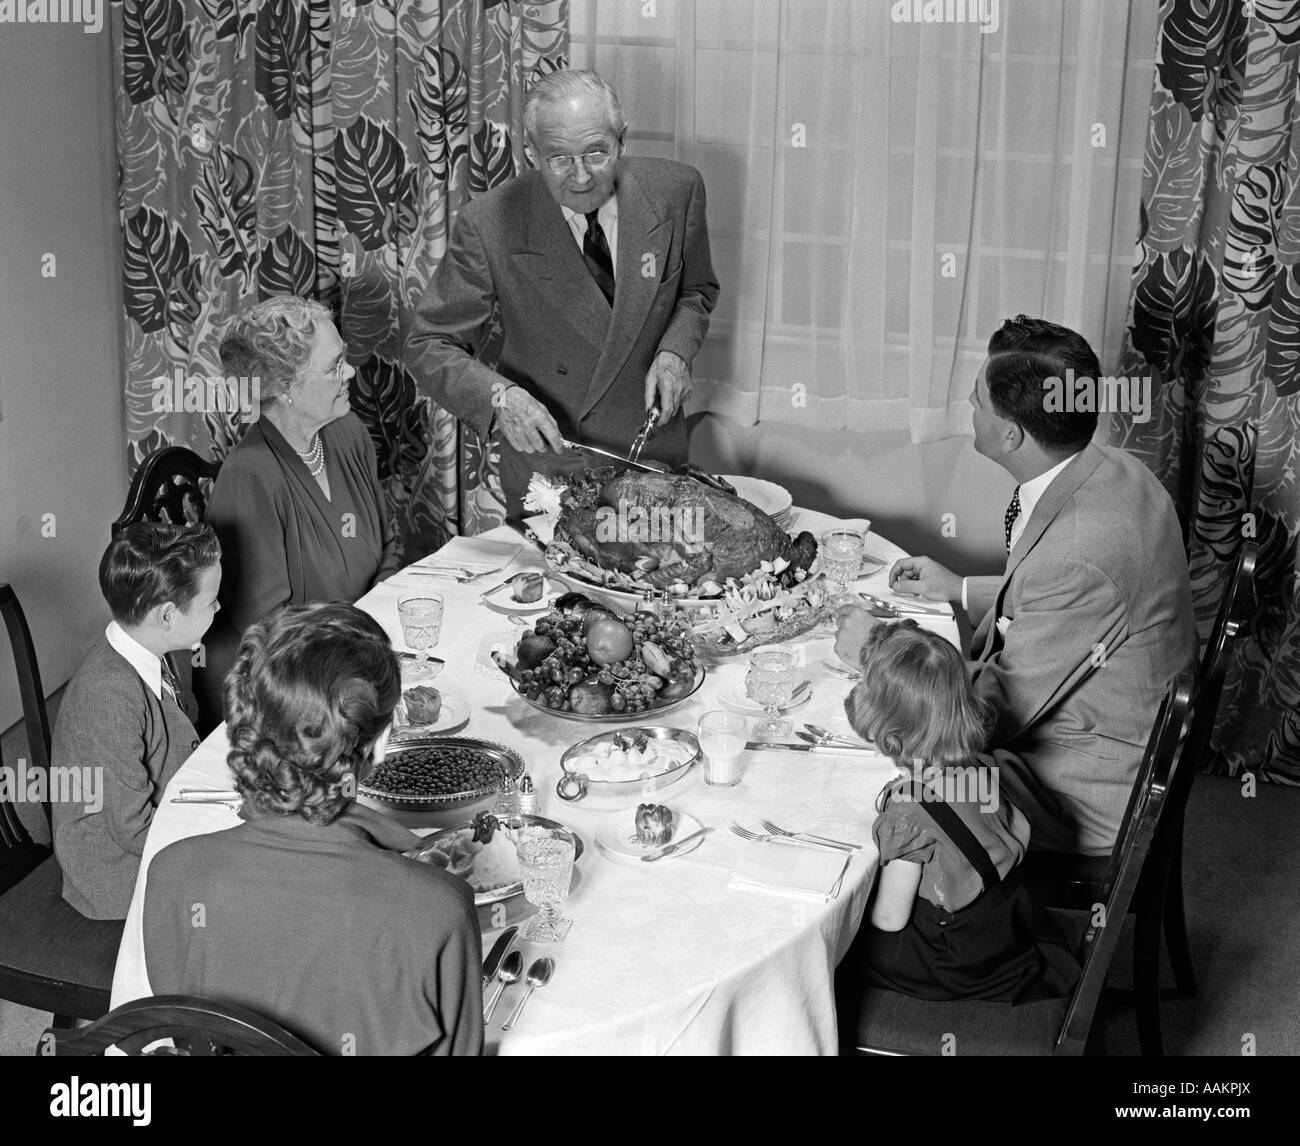 1940s 1950s 3 GENERATION FAMILY MEAL DINING ROOM TABLE GRANDFATHER CARVING TURKEY Stock Photo